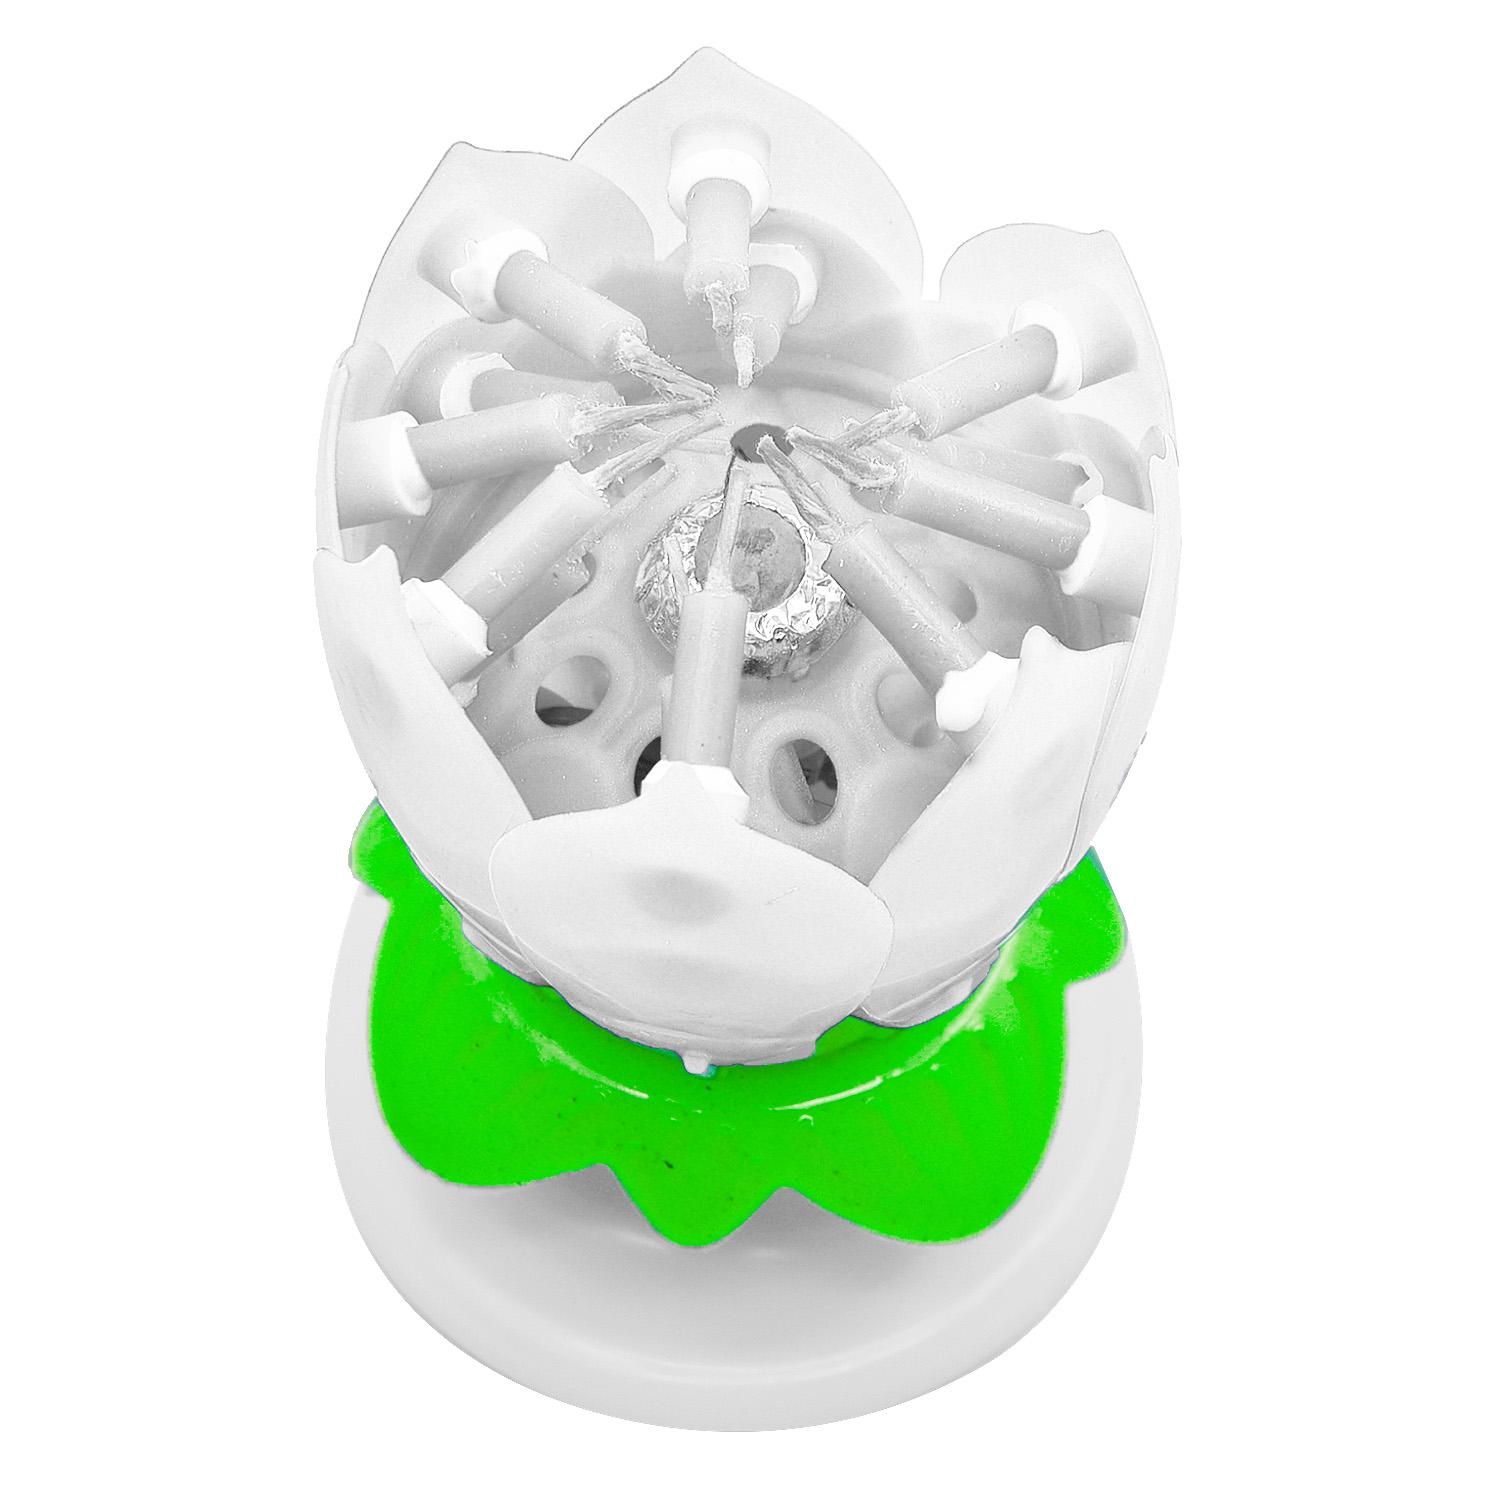 Flower Shaped 2-Layer 14-Candle Birthday Electric Music Paraffin Candle Flaming Flower Candle White - intl